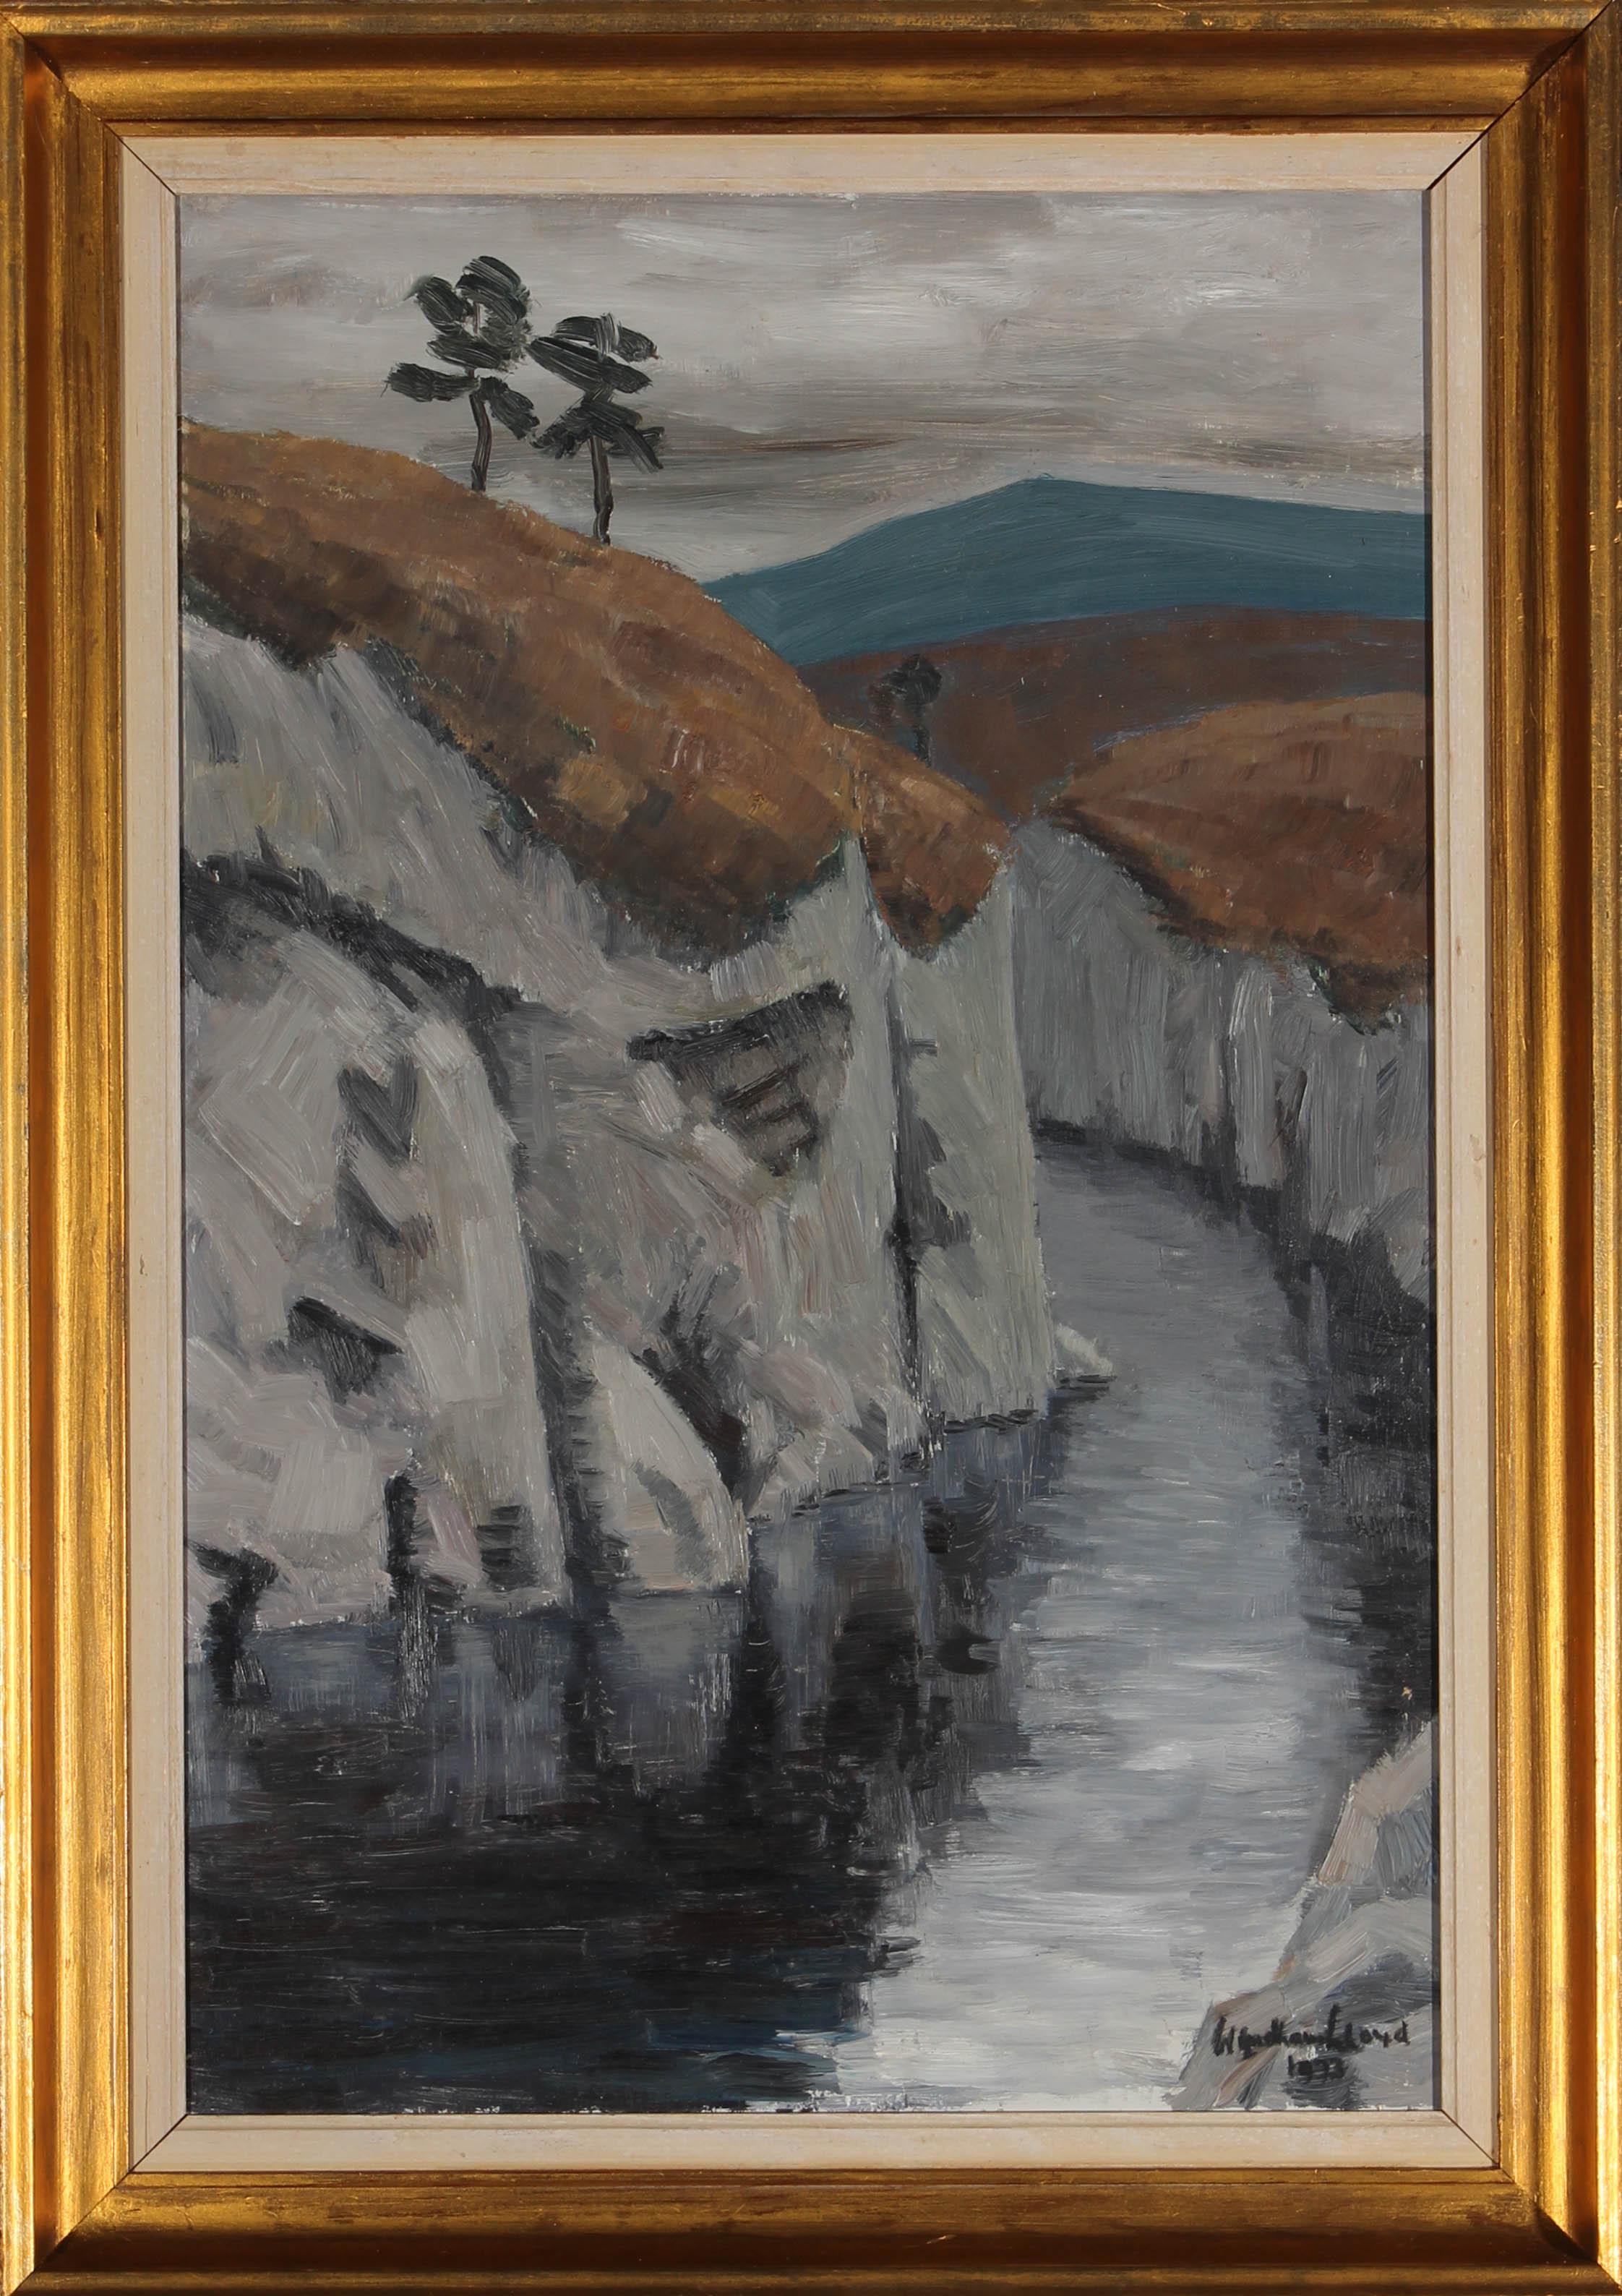 An atmospheric oil painting depicting a trailing river gorge with steep rocky walls. The artist has captured the harshness of the landscape with busy impressionistic brushstrokes. Signed and dated to the lower right. The painting is well presented